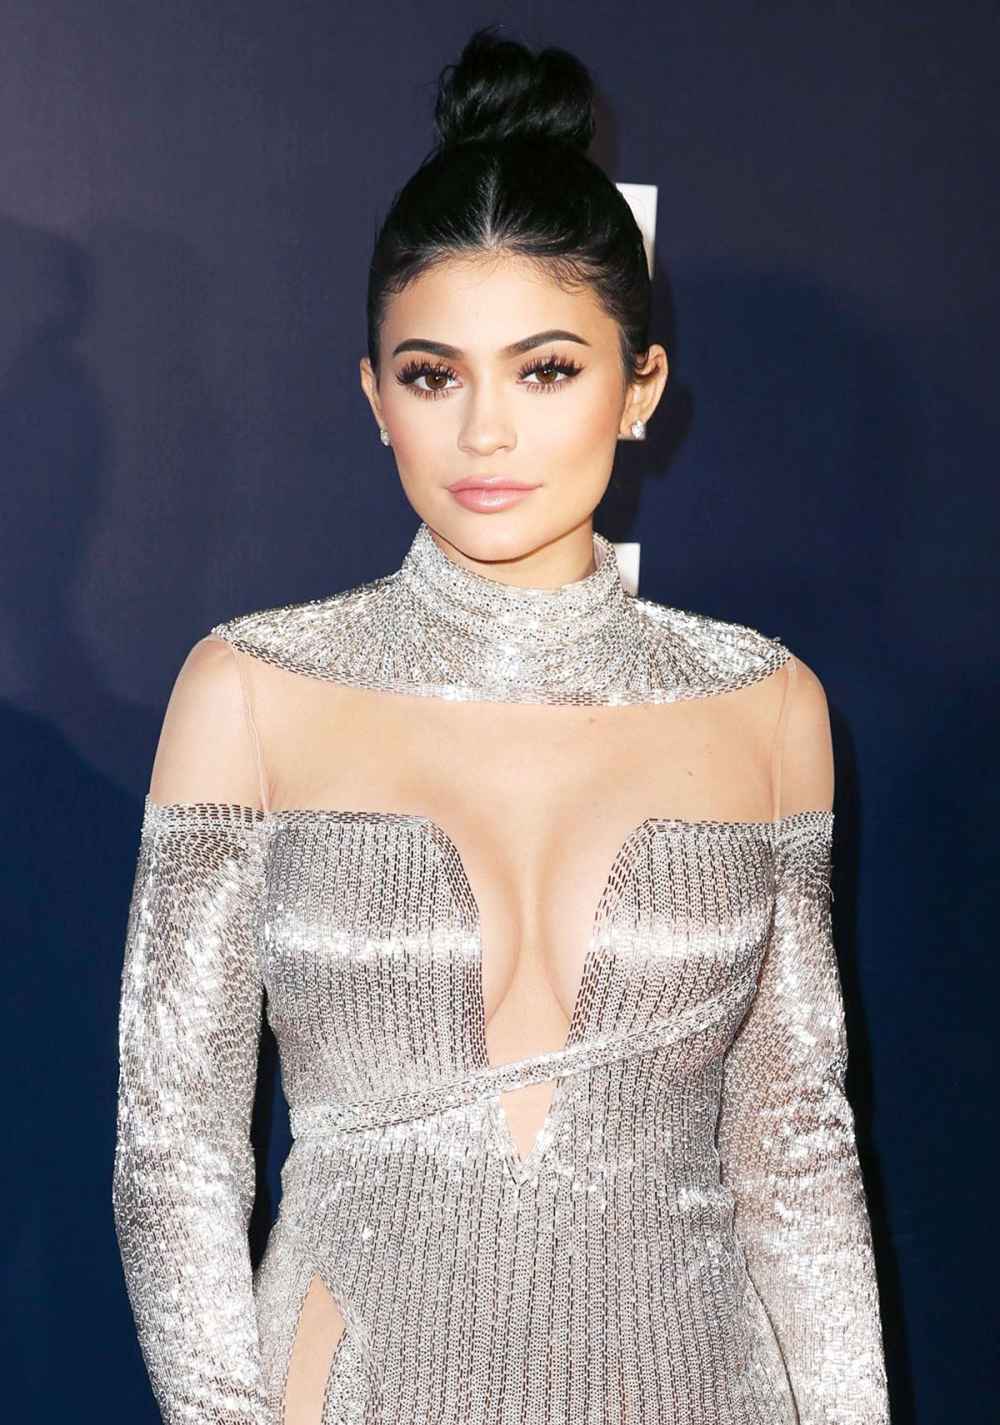 Kylie Jenner's Coty Business Deal